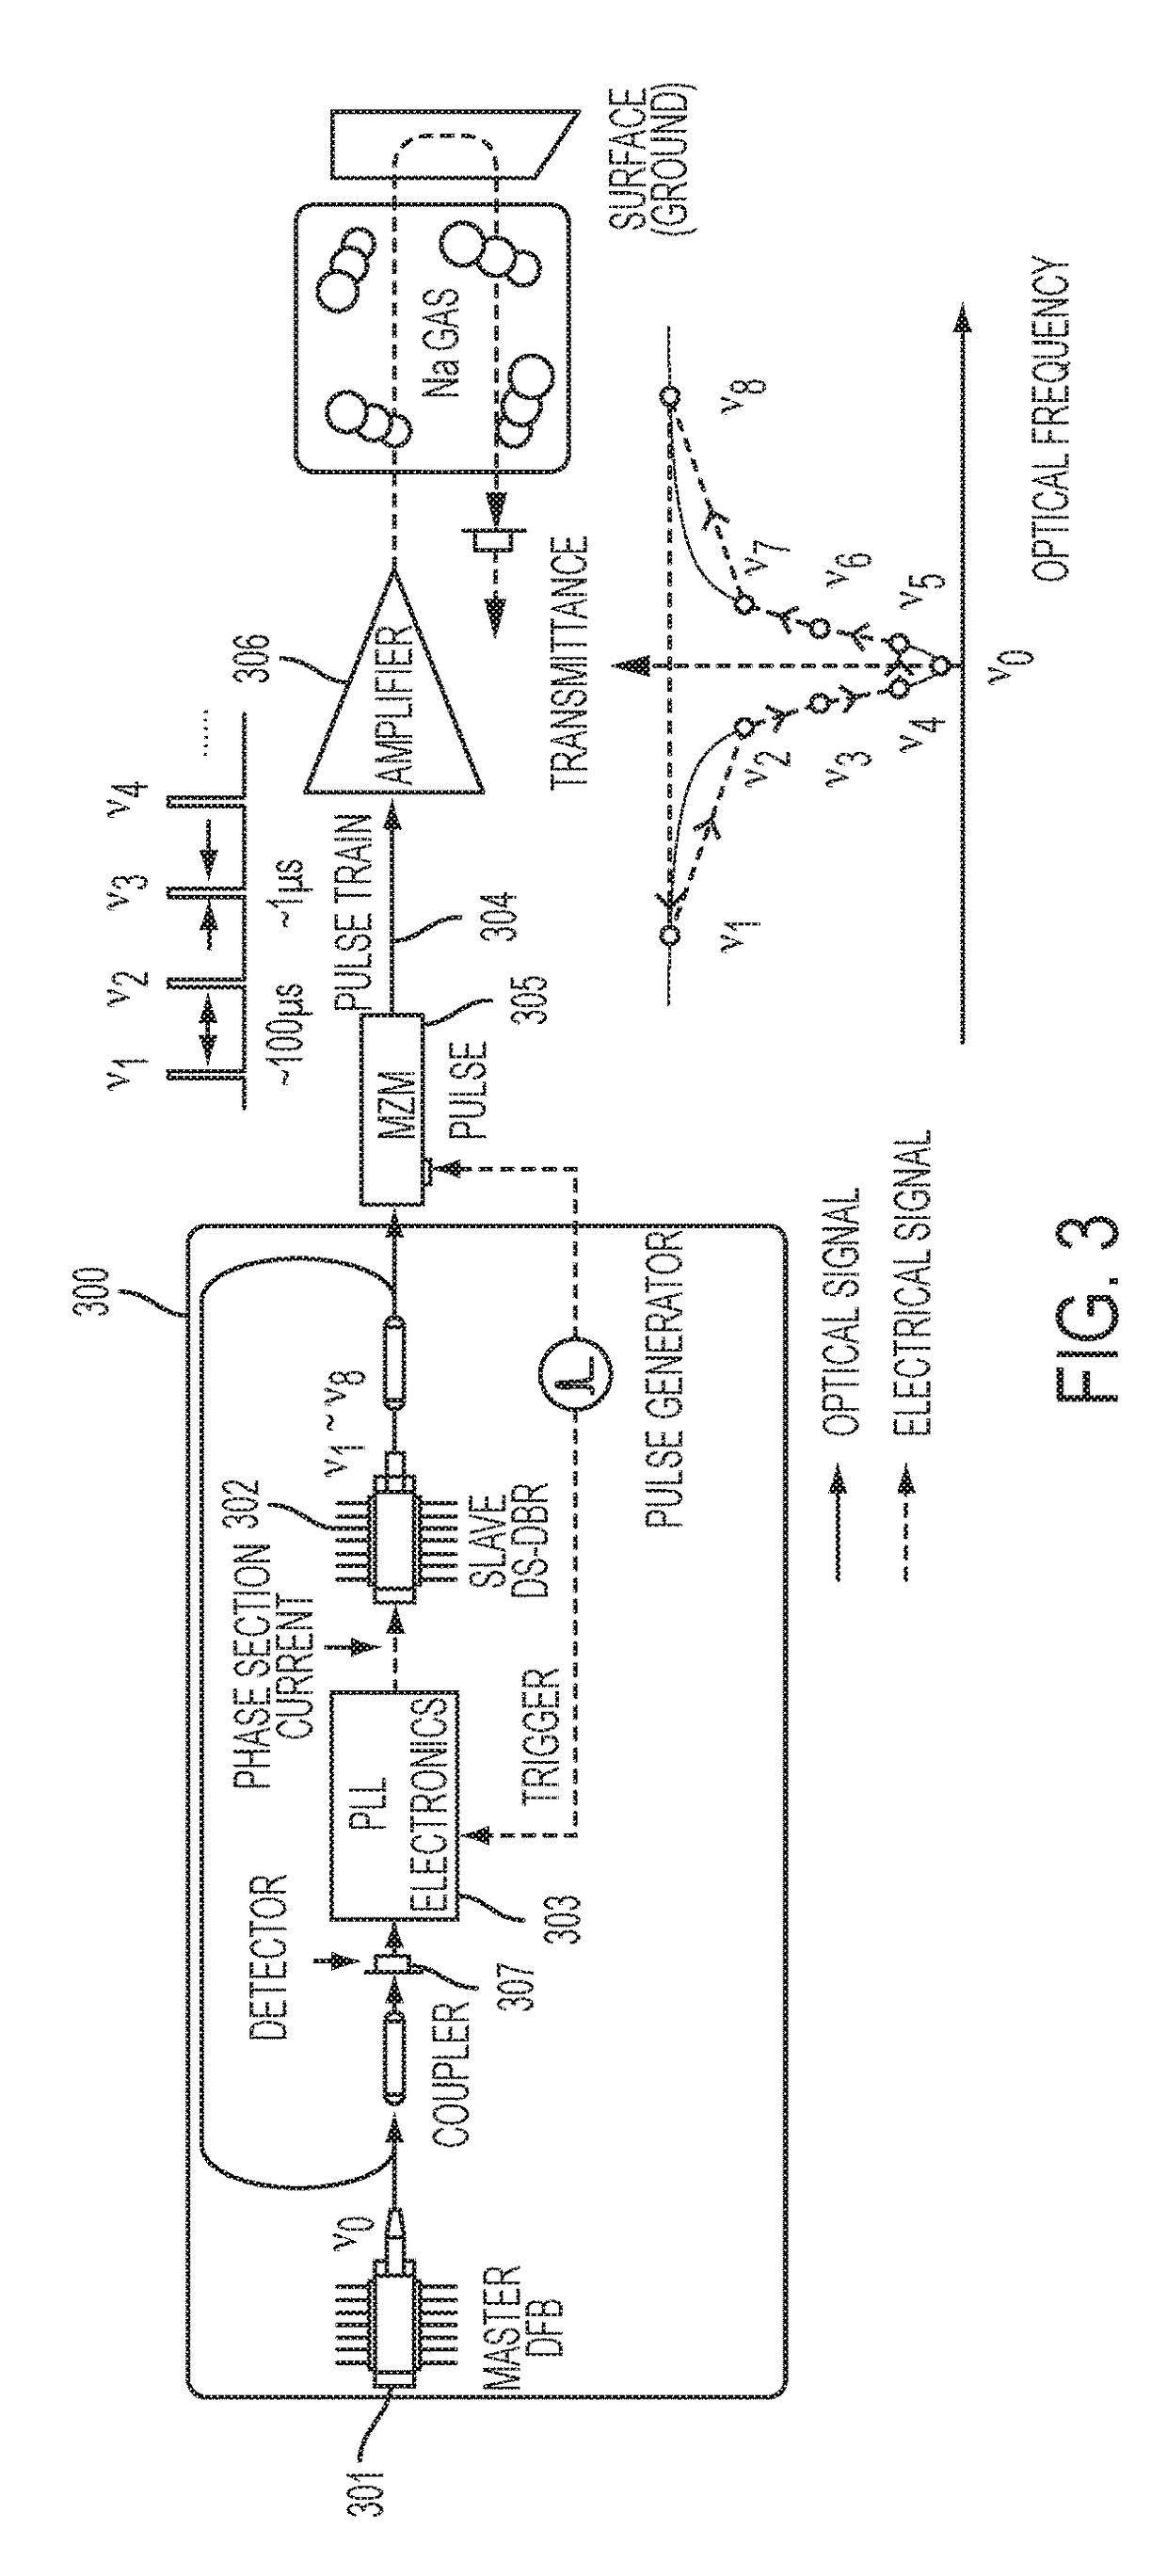 Space-based sodium lidar instrument and method of operation